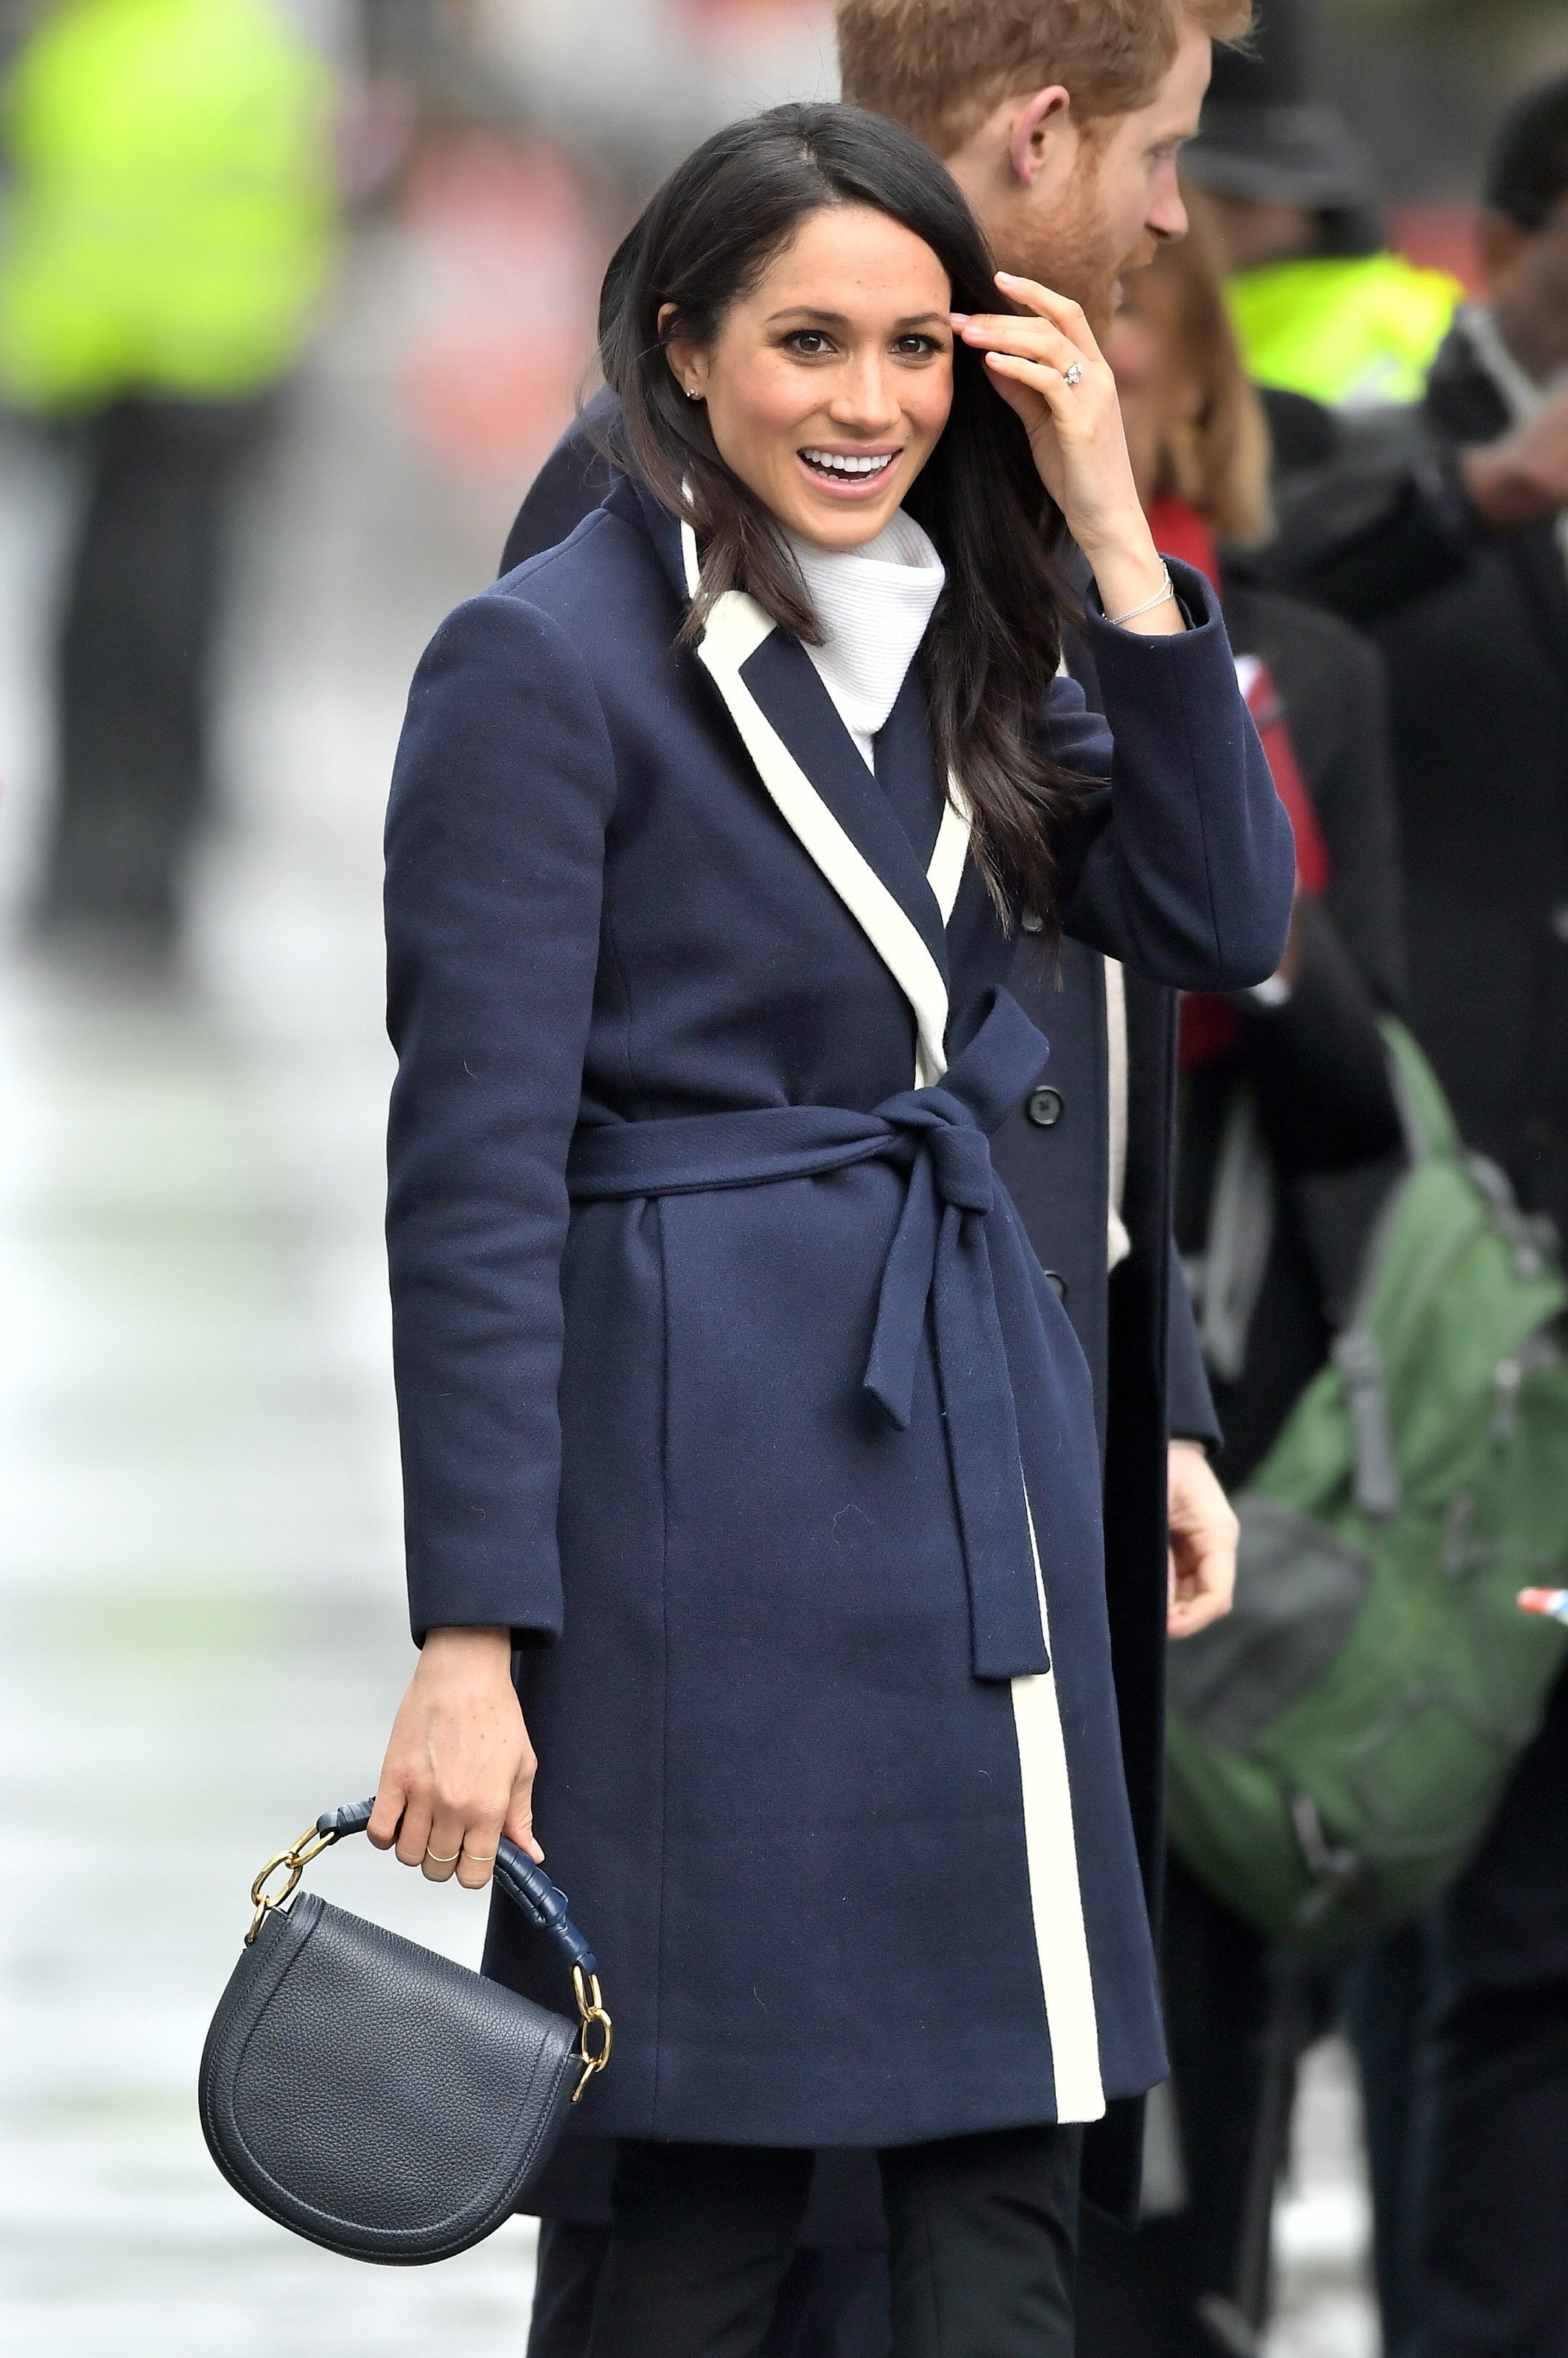 Meghan Markle's Go-To Spring Jacket Is from J.Crew